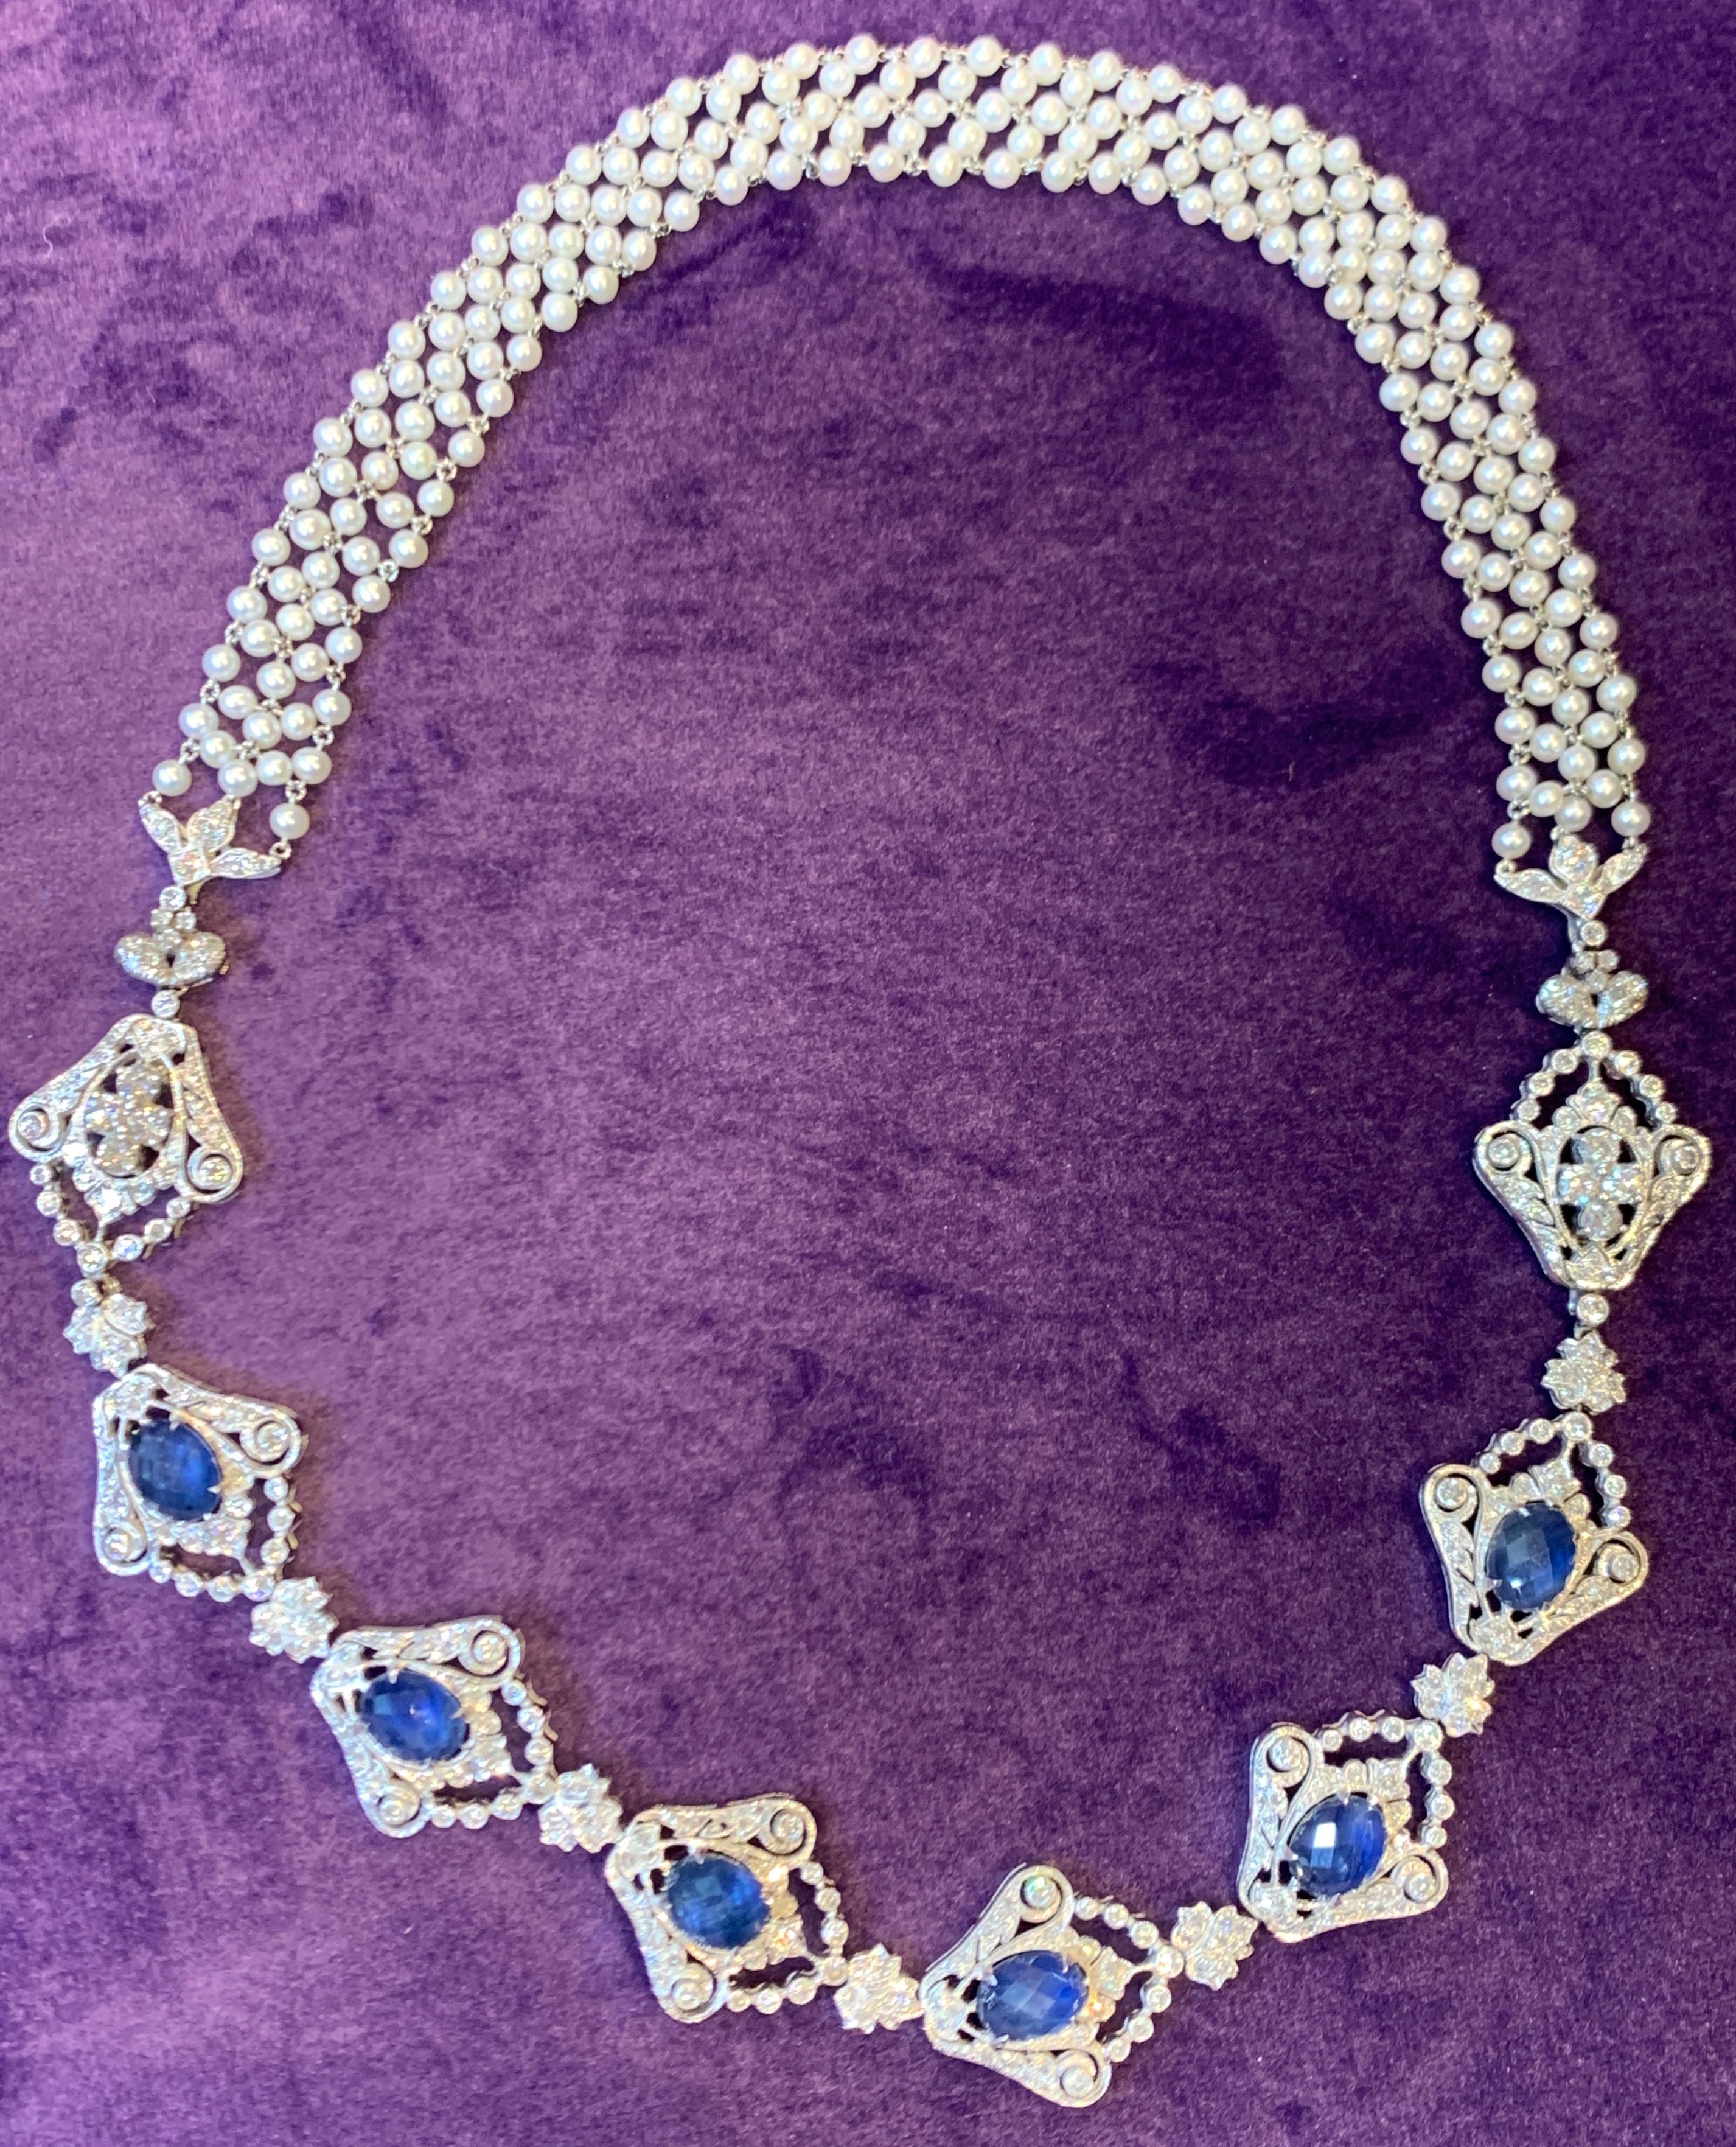 Sapphire, Diamond & Pearl Necklace with 1 detachable link 
18K White Gold & Platinum
Length: 18